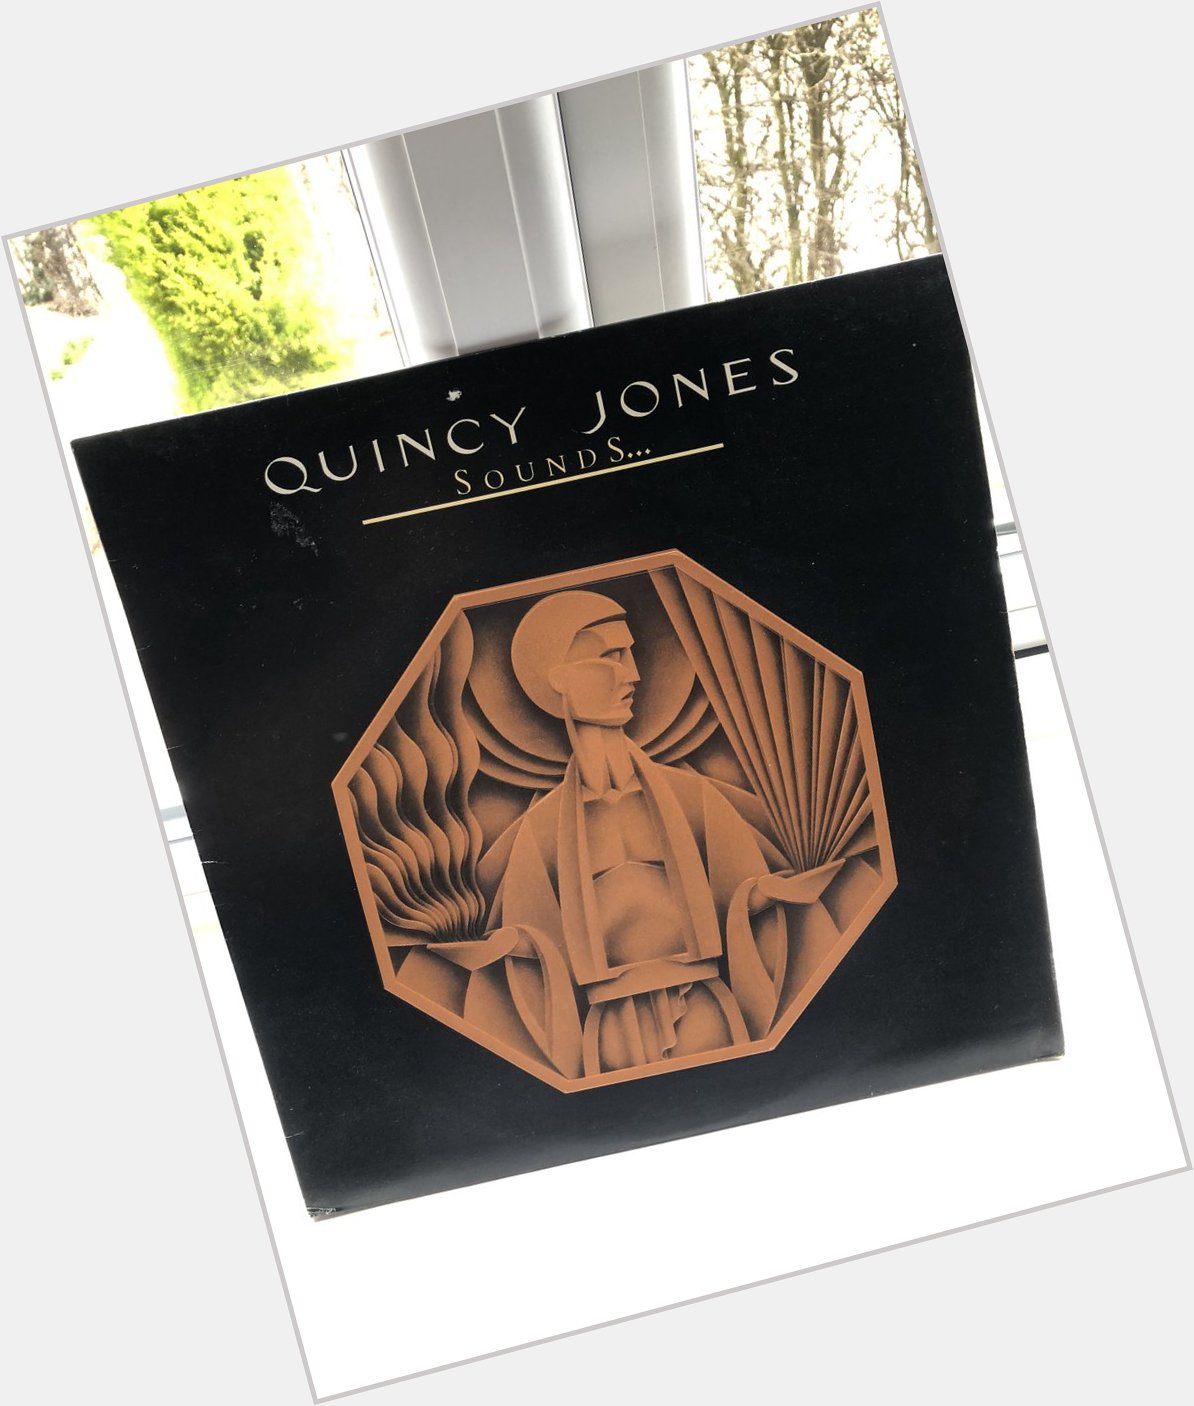 Happy birthday Quincy Jones . I ll be playing this later on. 